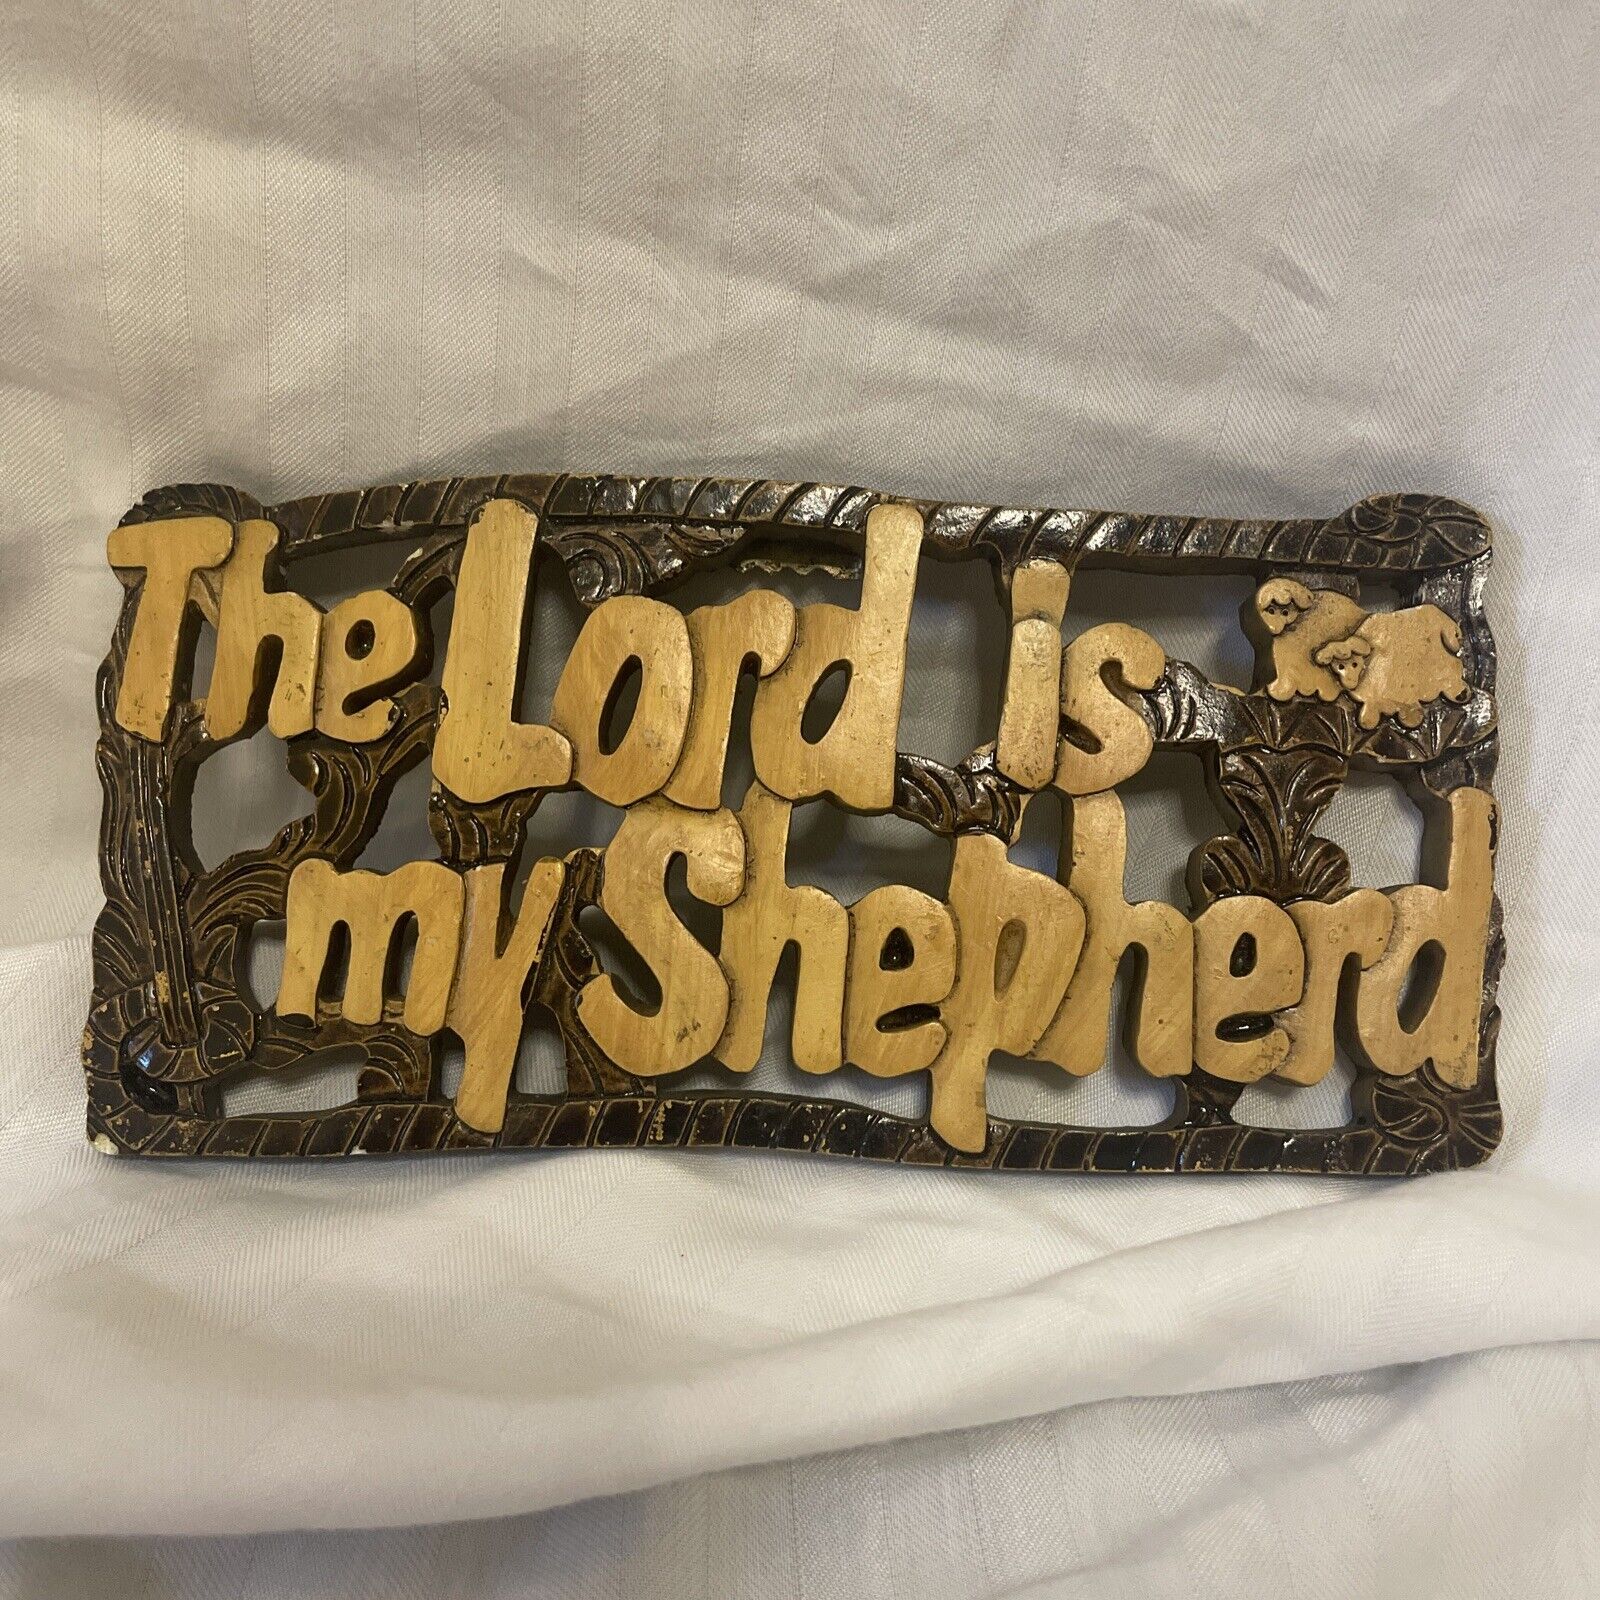 The Lord is my Shepherd Cast Resin Wall Plaque